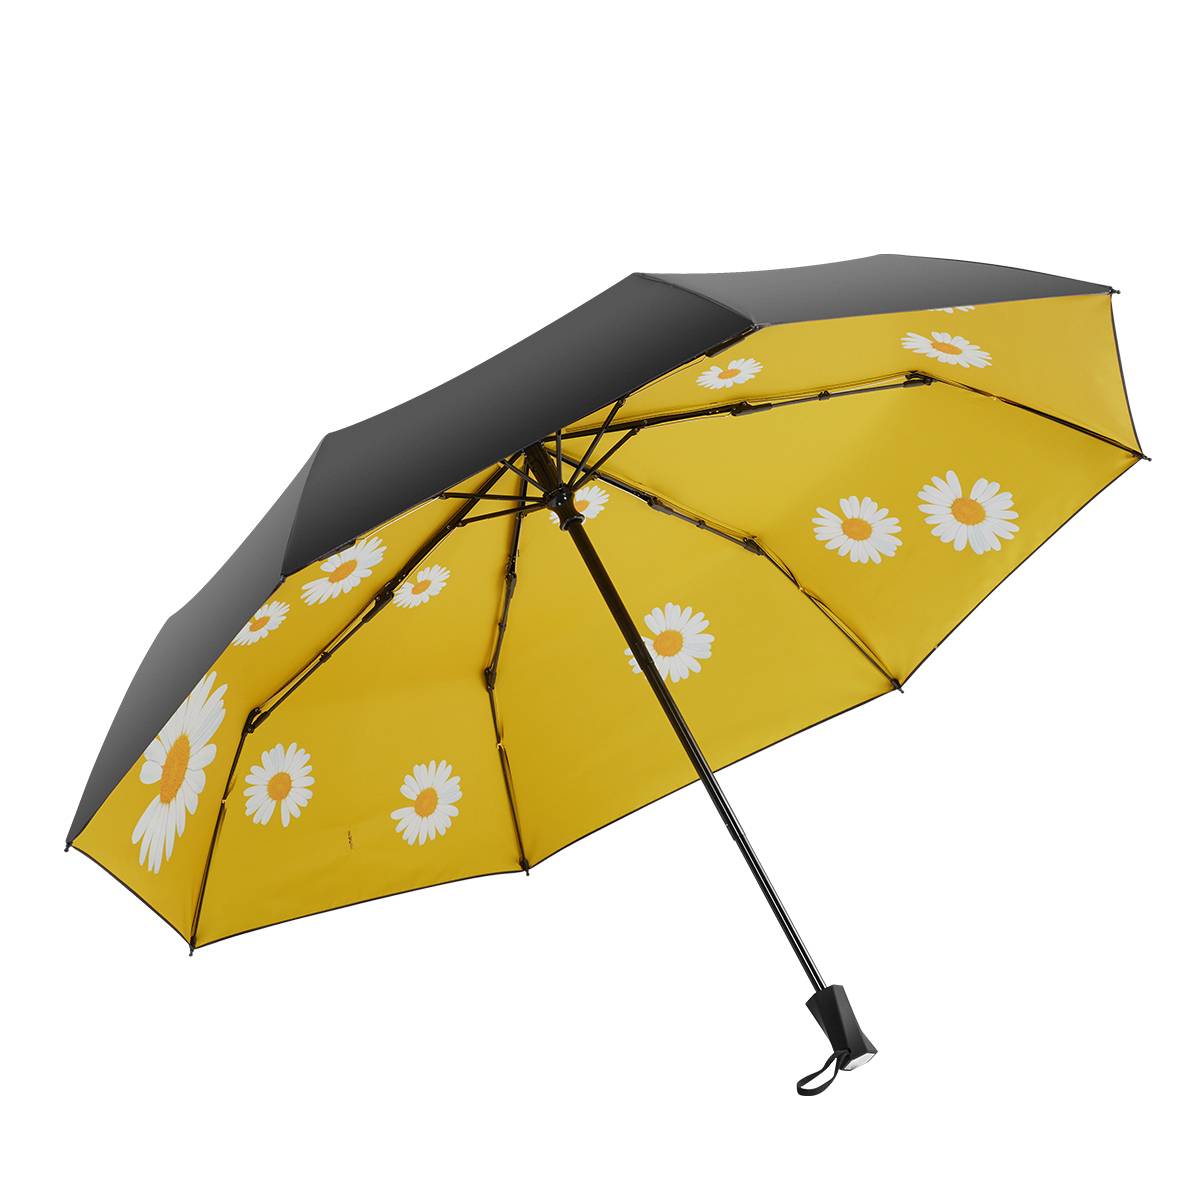 2021 wholesale price Long Shaft Golf Umbrella - 21 inch 8 ribs manual open unique handle design with daisy flower 3 fold umbrella – DongFangZhanXin